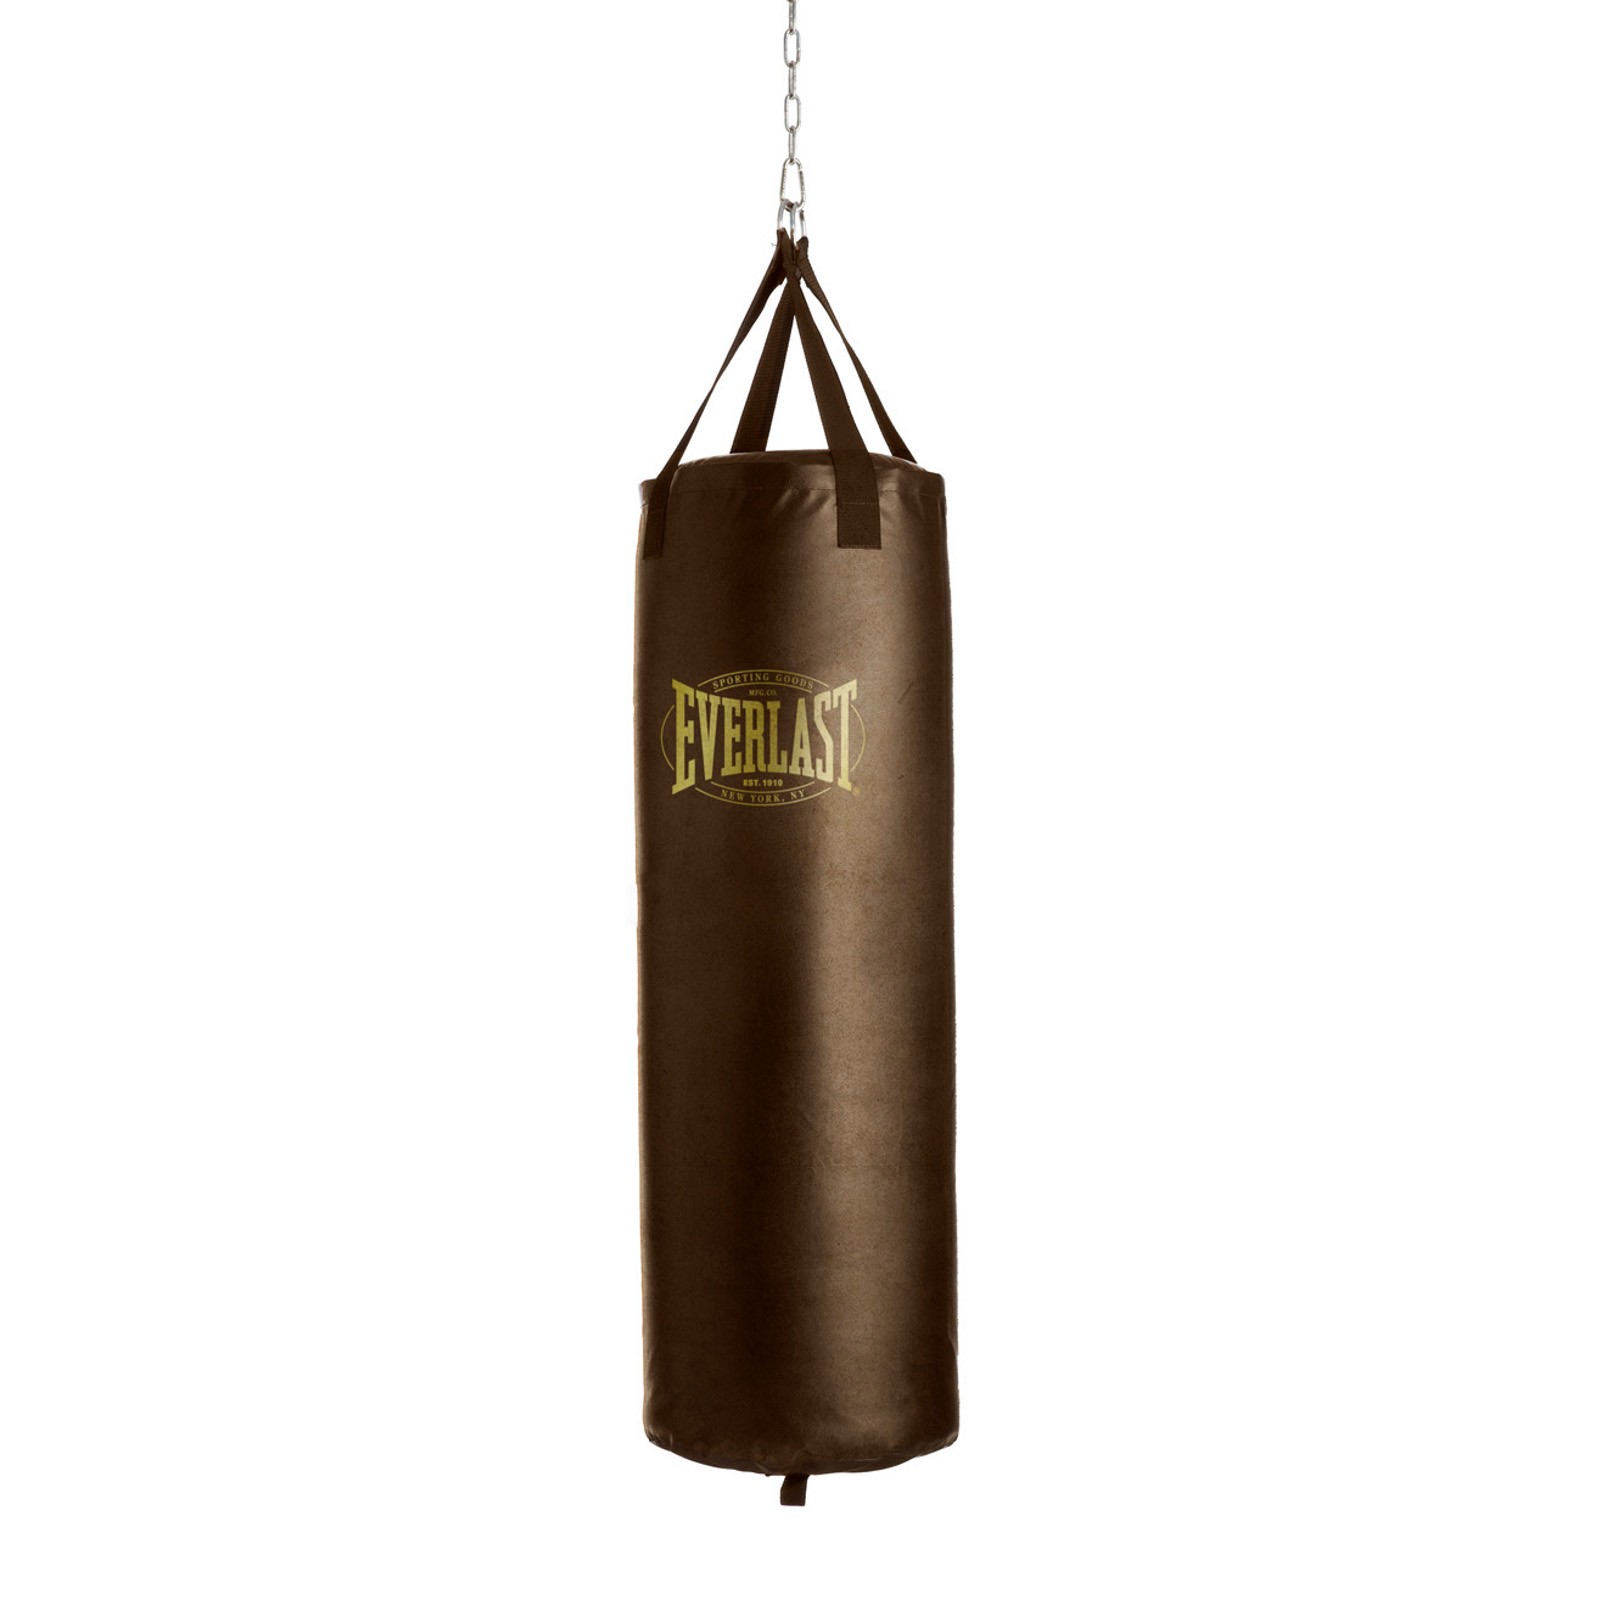 Everlast 1910 Collection - Heavy Bag, 102cm (unfilled) best buy at - T-Fitness